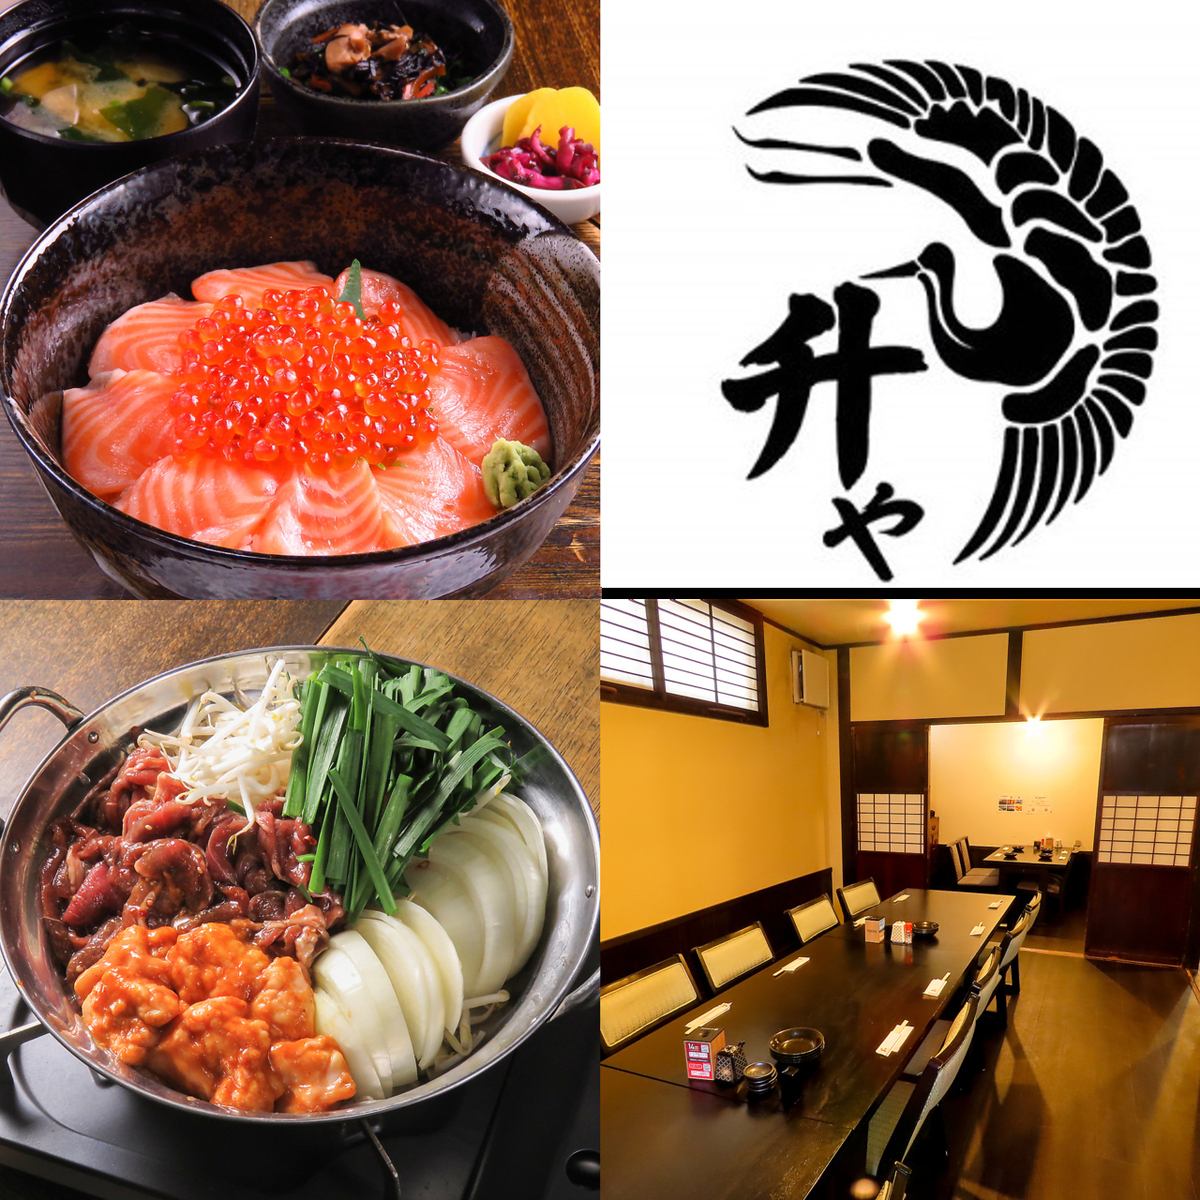 A private izakaya that has been loved for over 40 years.We pride ourselves on our fresh seafood dishes.